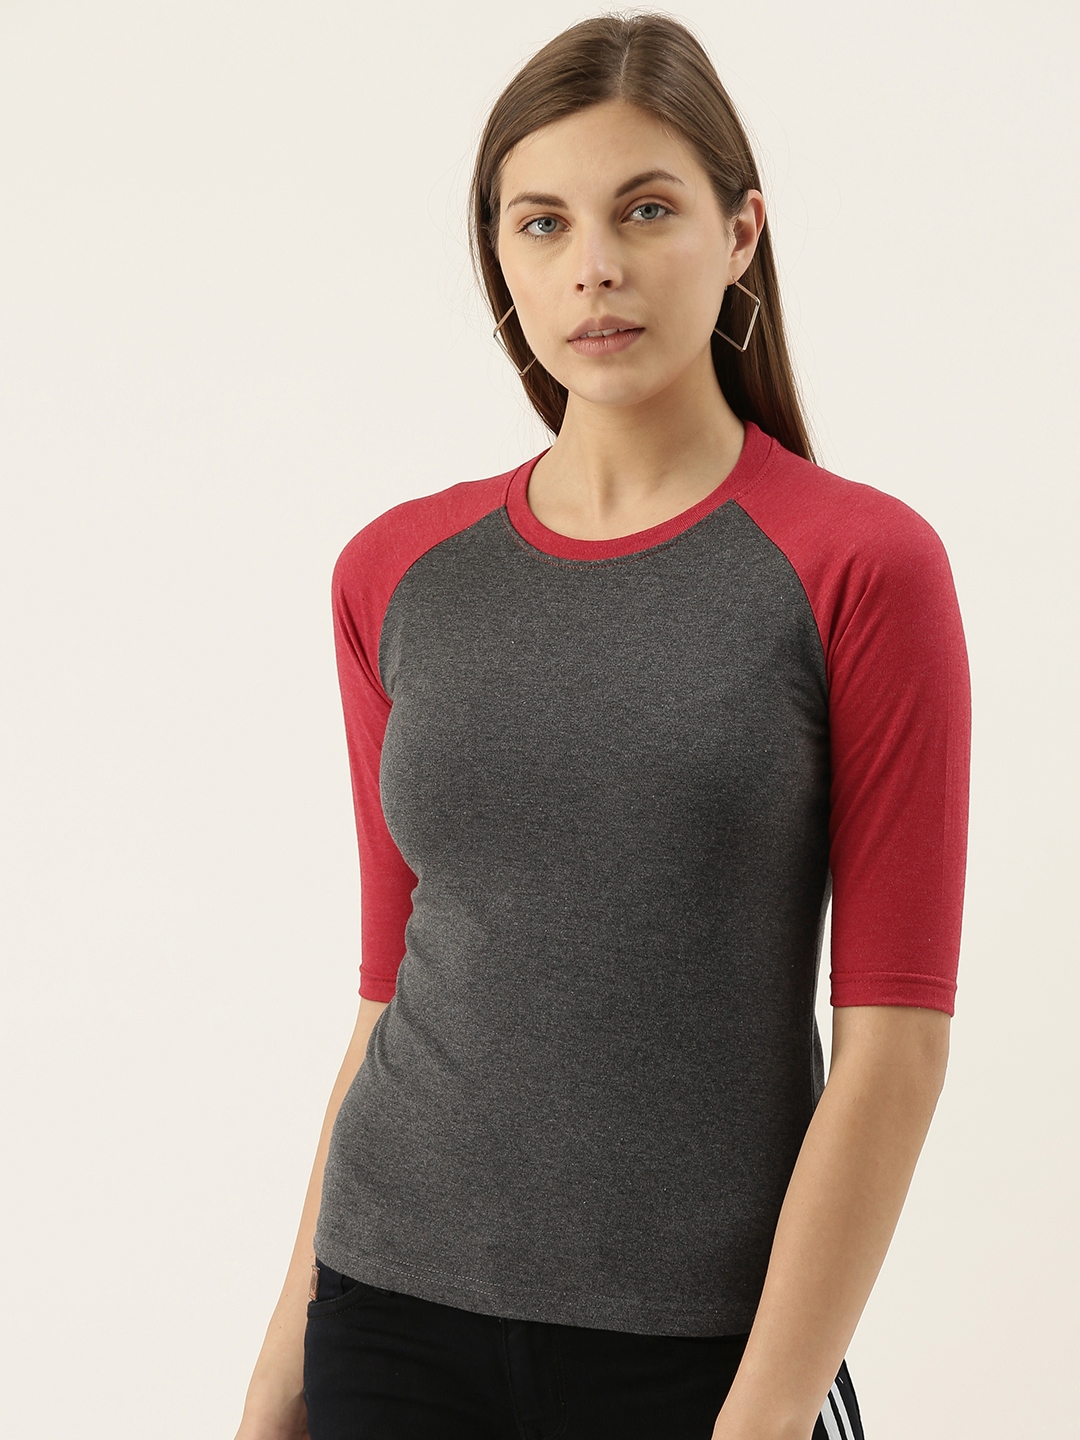 Campus Sutra Women Charcoal Grey Solid Round Neck T shirt